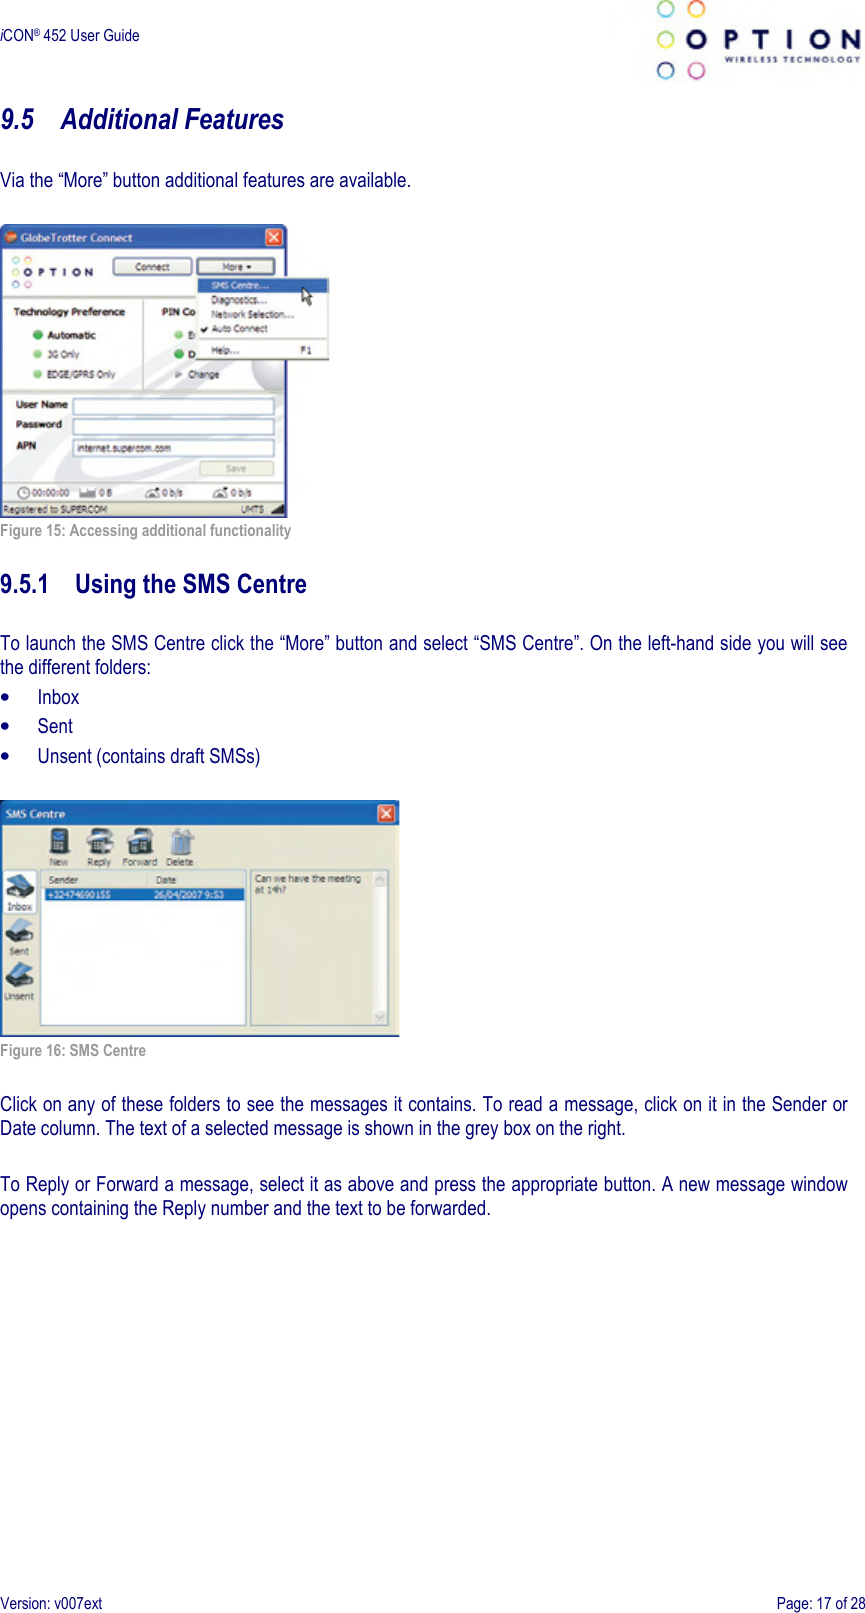  iCON® 452 User Guide     Version: v007ext  Page: 17 of 28 9.5 Additional Features  Via the “More” button additional features are available.   Figure 15: Accessing additional functionality  9.5.1 Using the SMS Centre  To launch the SMS Centre click the “More” button and select “SMS Centre”. On the left-hand side you will see the different folders: • Inbox • Sent • Unsent (contains draft SMSs)   Figure 16: SMS Centre  Click on any of these folders to see the messages it contains. To read a message, click on it in the Sender or Date column. The text of a selected message is shown in the grey box on the right.  To Reply or Forward a message, select it as above and press the appropriate button. A new message window opens containing the Reply number and the text to be forwarded. 